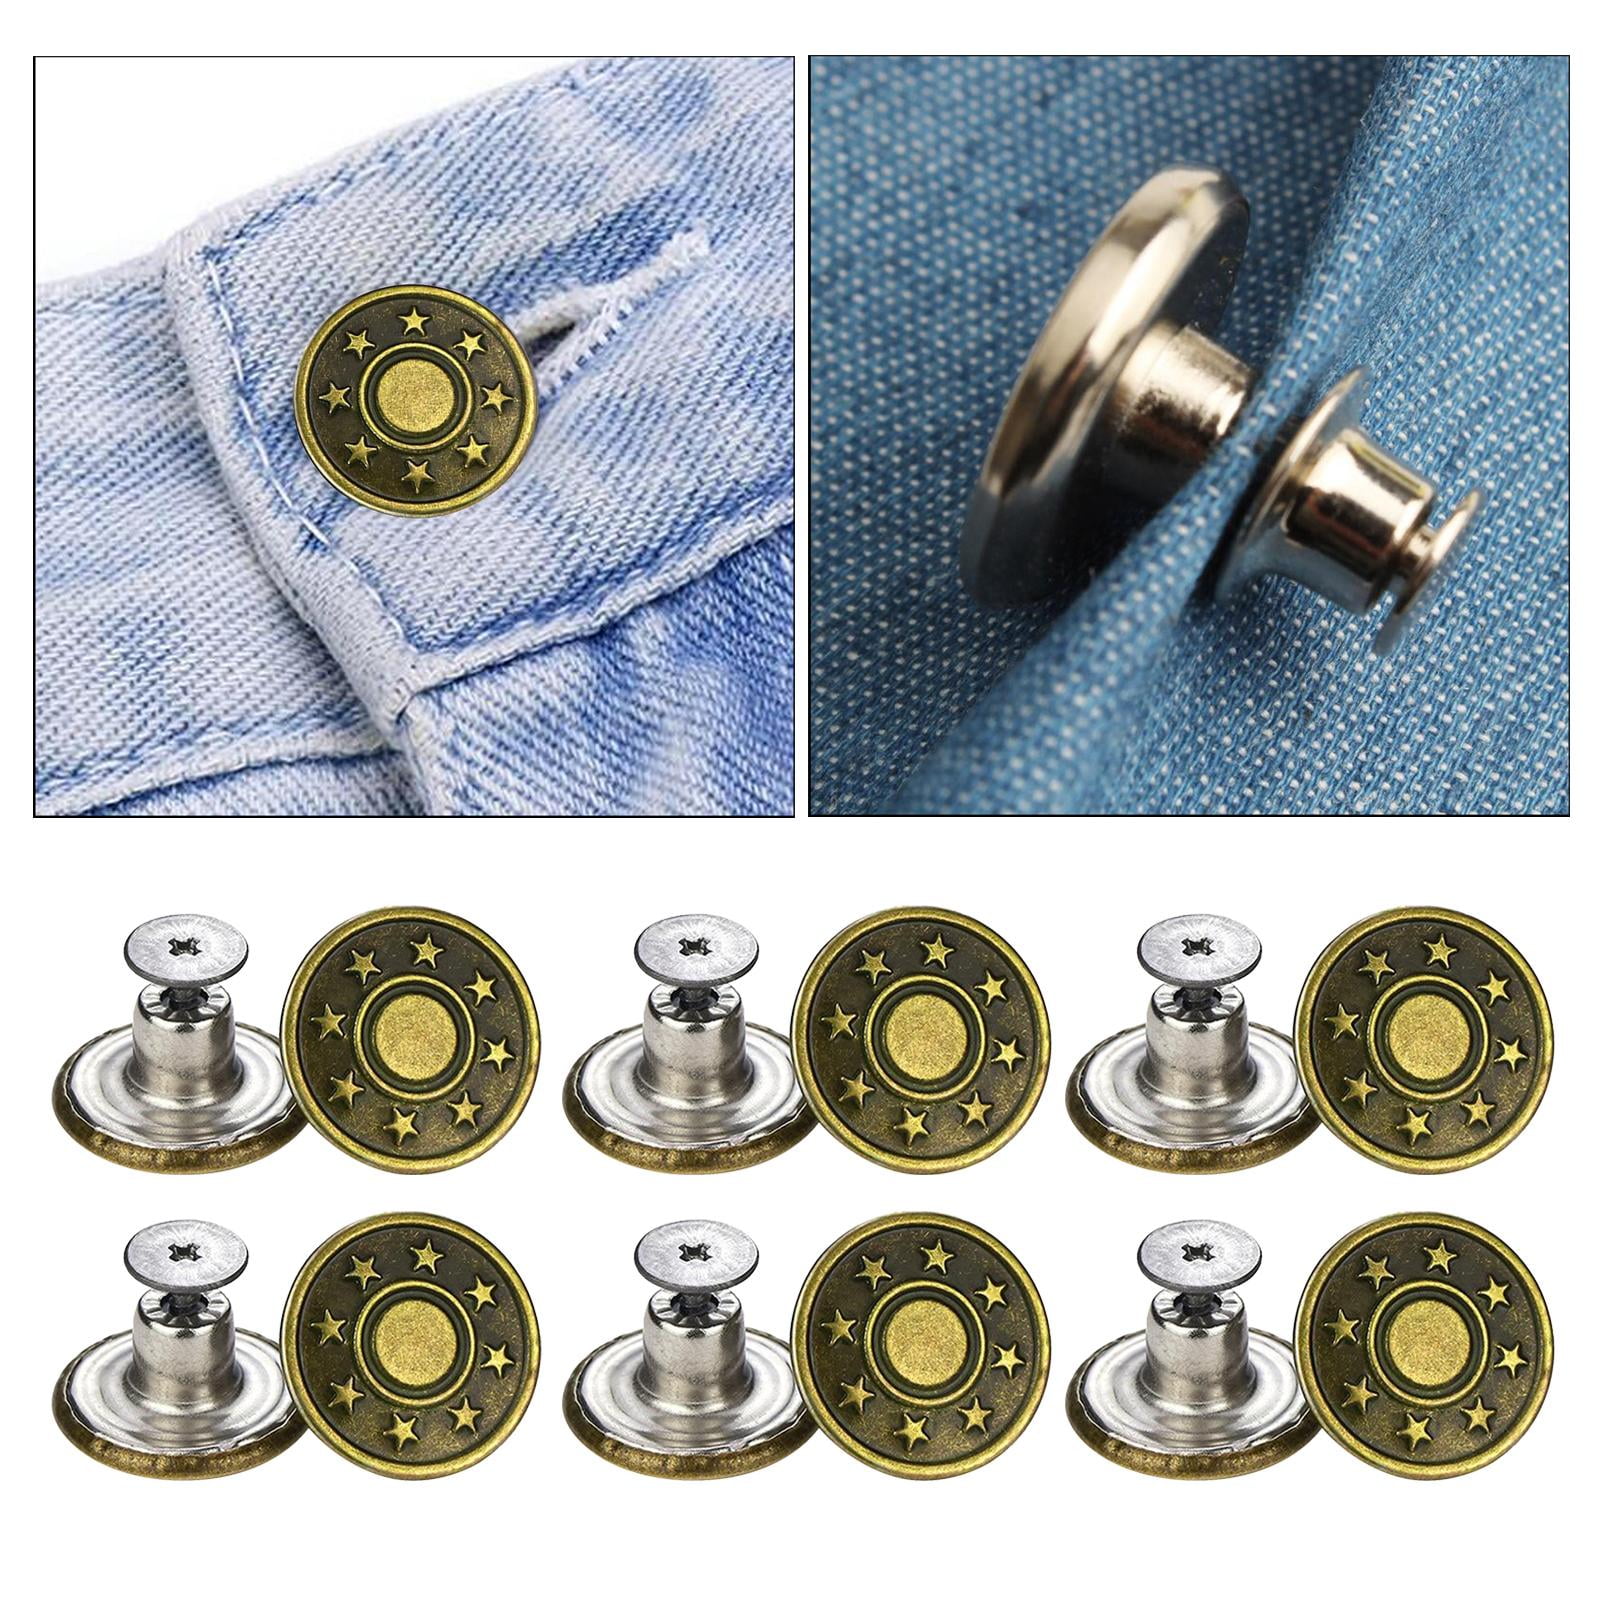 This is what those little metal buttons on your jeans are really for